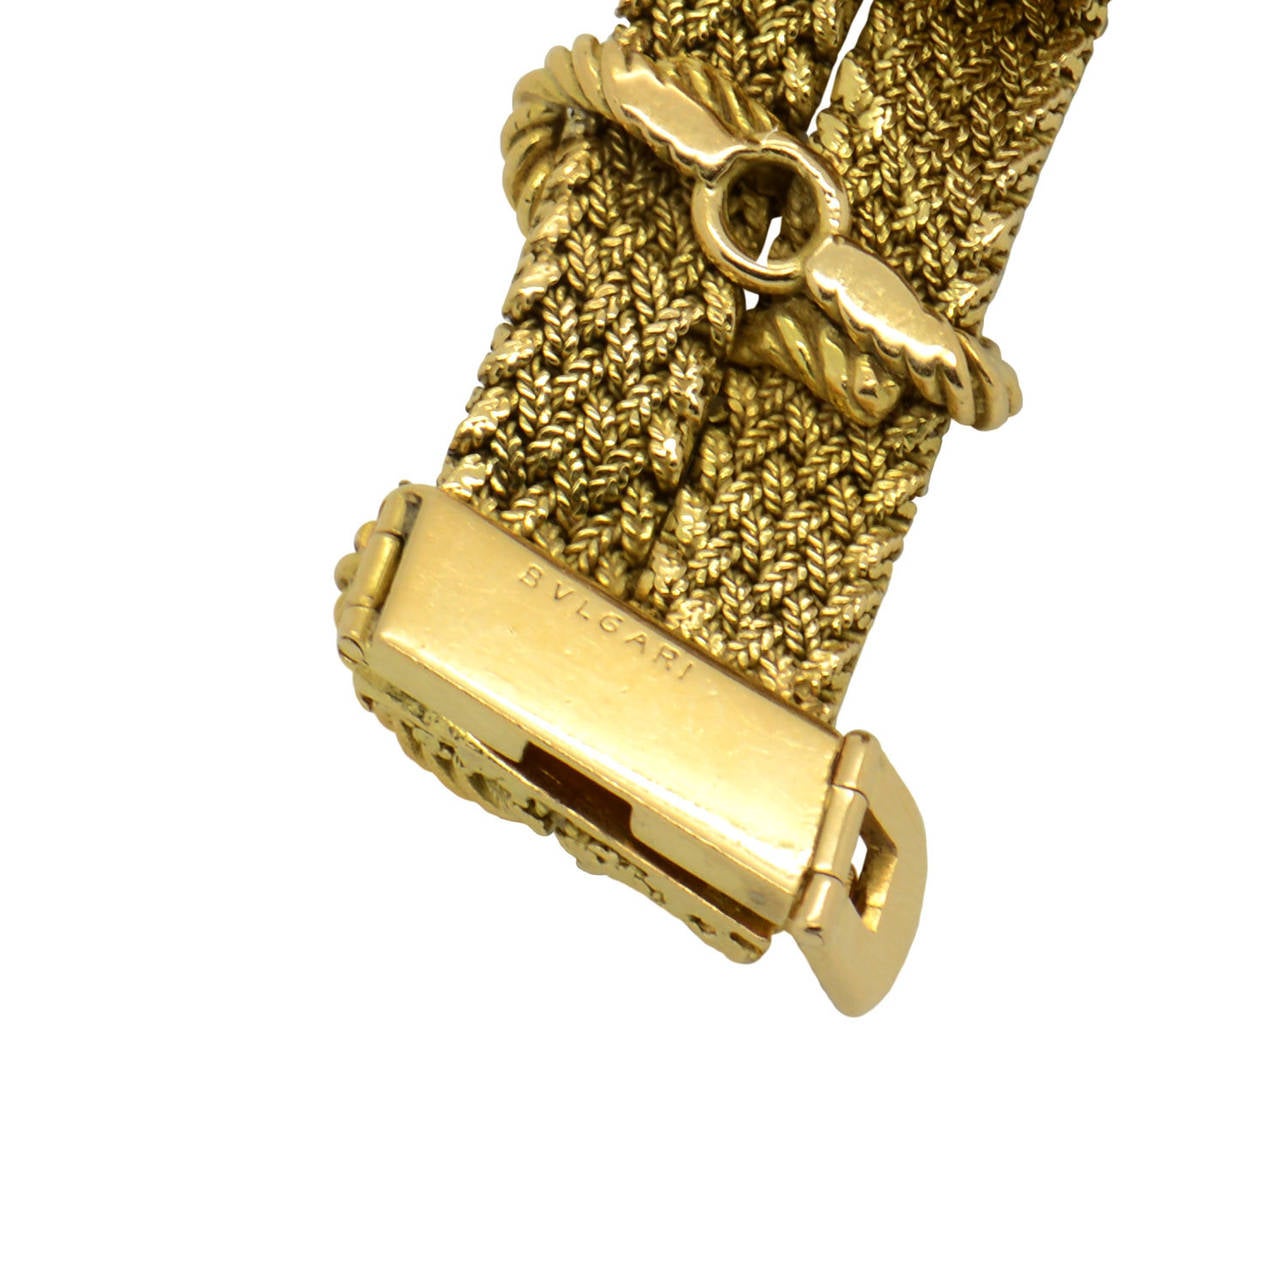 An unusual 1940s Bulgari 18K yellow gold bracelet. Signed Bulgari. Soft, weaved. Length 18.5 cm. Weight 76 g. This lot is for sale with Customer to Customer price.